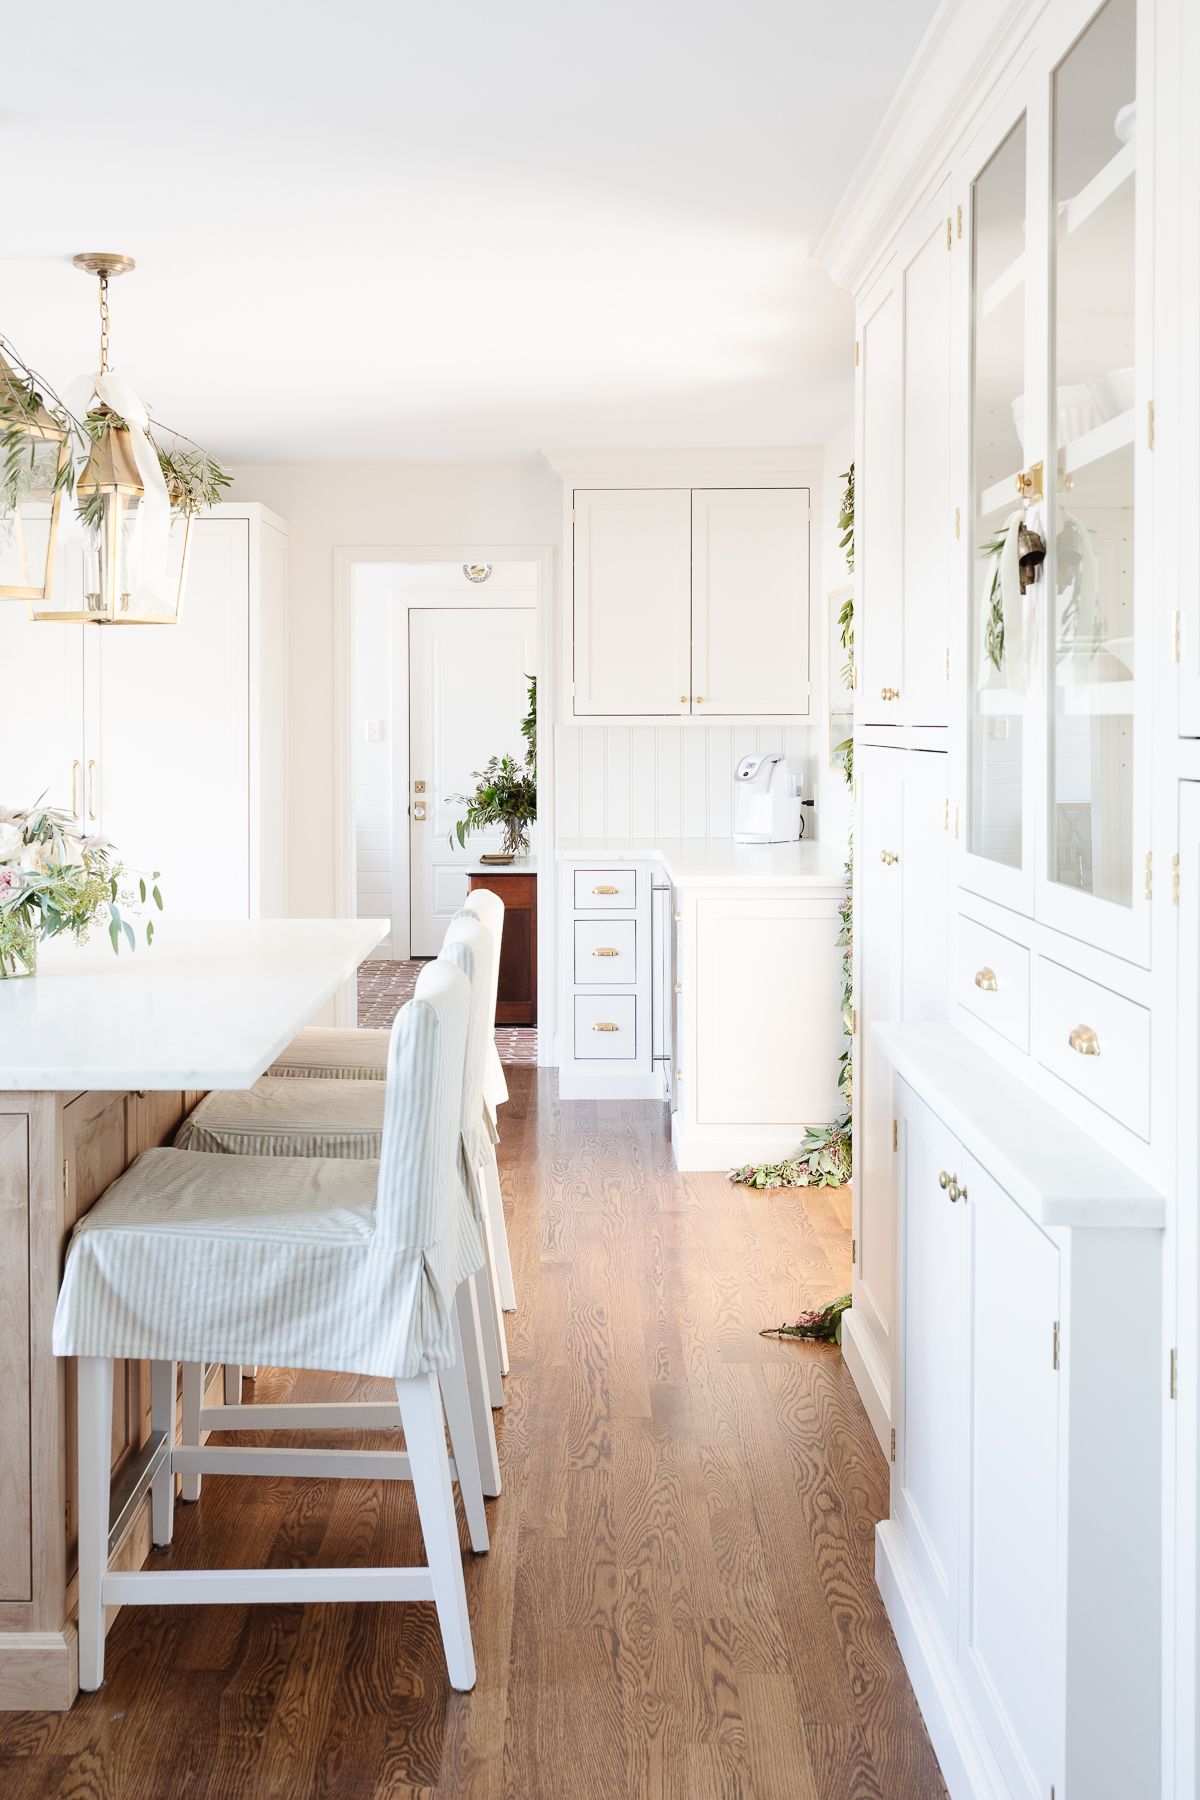 A white kitchen with a wood island and a paneled fridge with brass appliance pulls